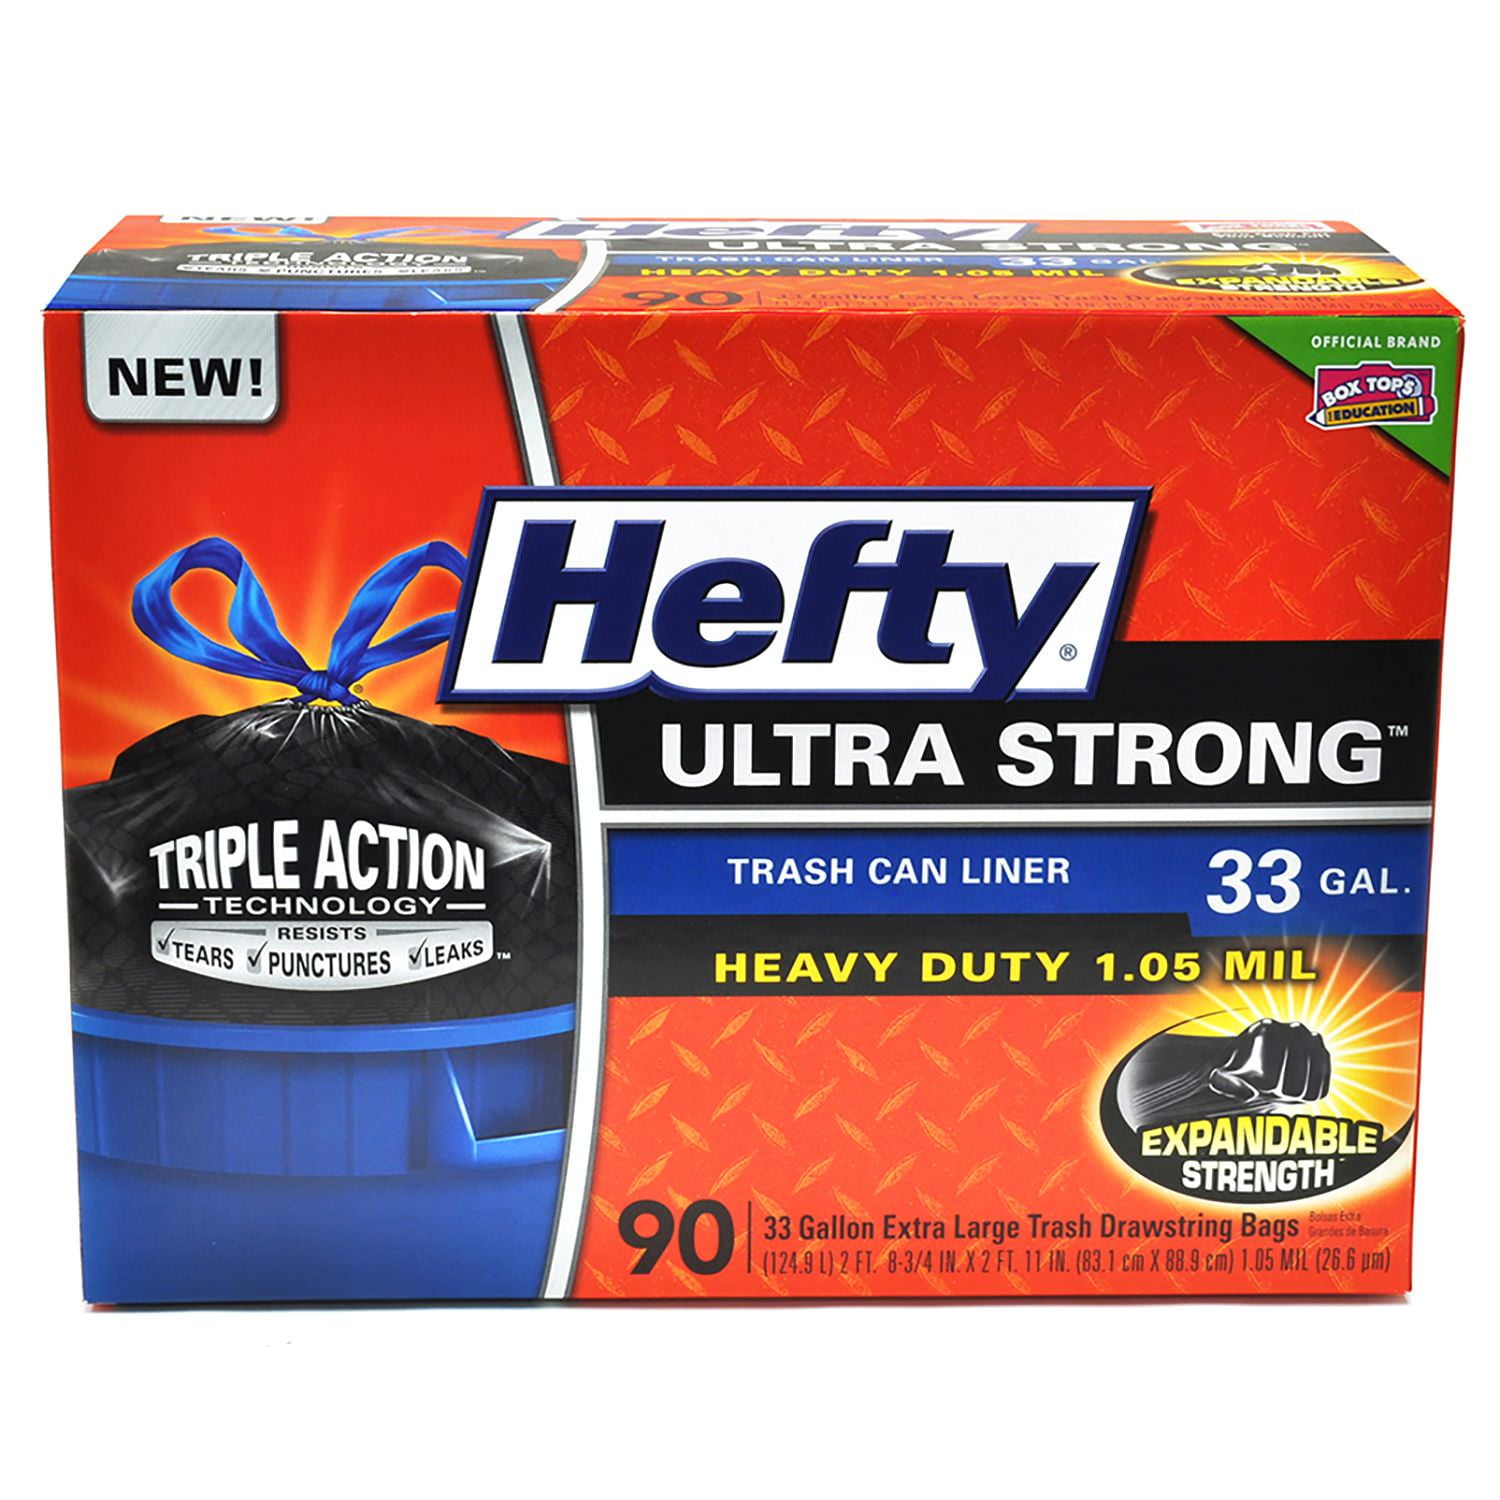 Hefty Trash Bags, Recycling, Drawstring, Large, Scent Free, 30 Gallon - 36 bags